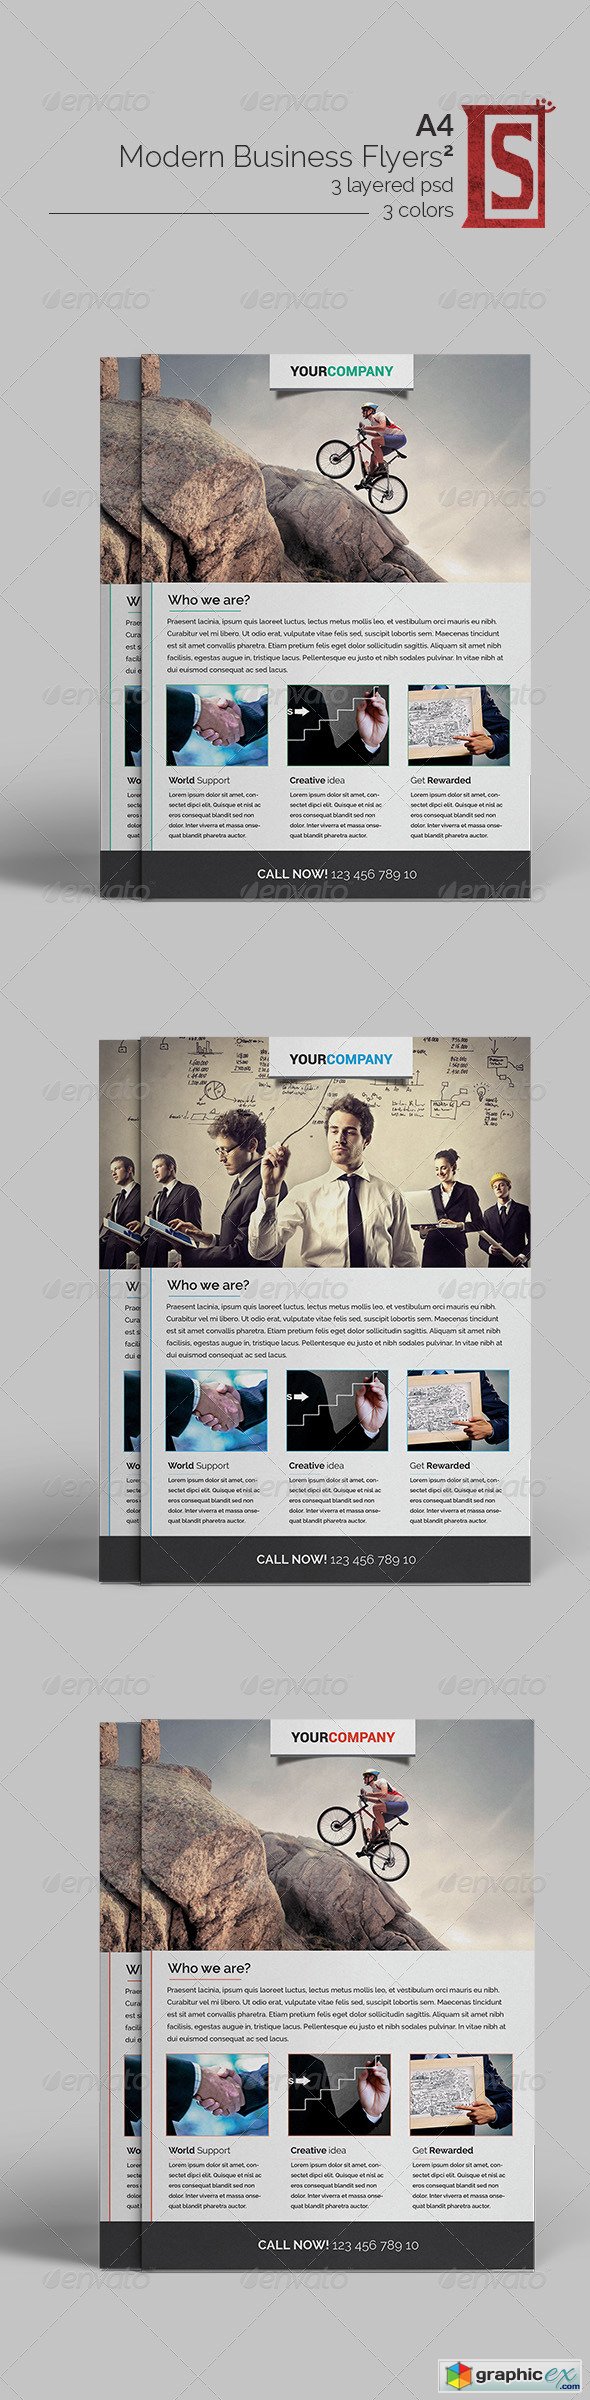 Multipurpose Business Flyer/Poster Template